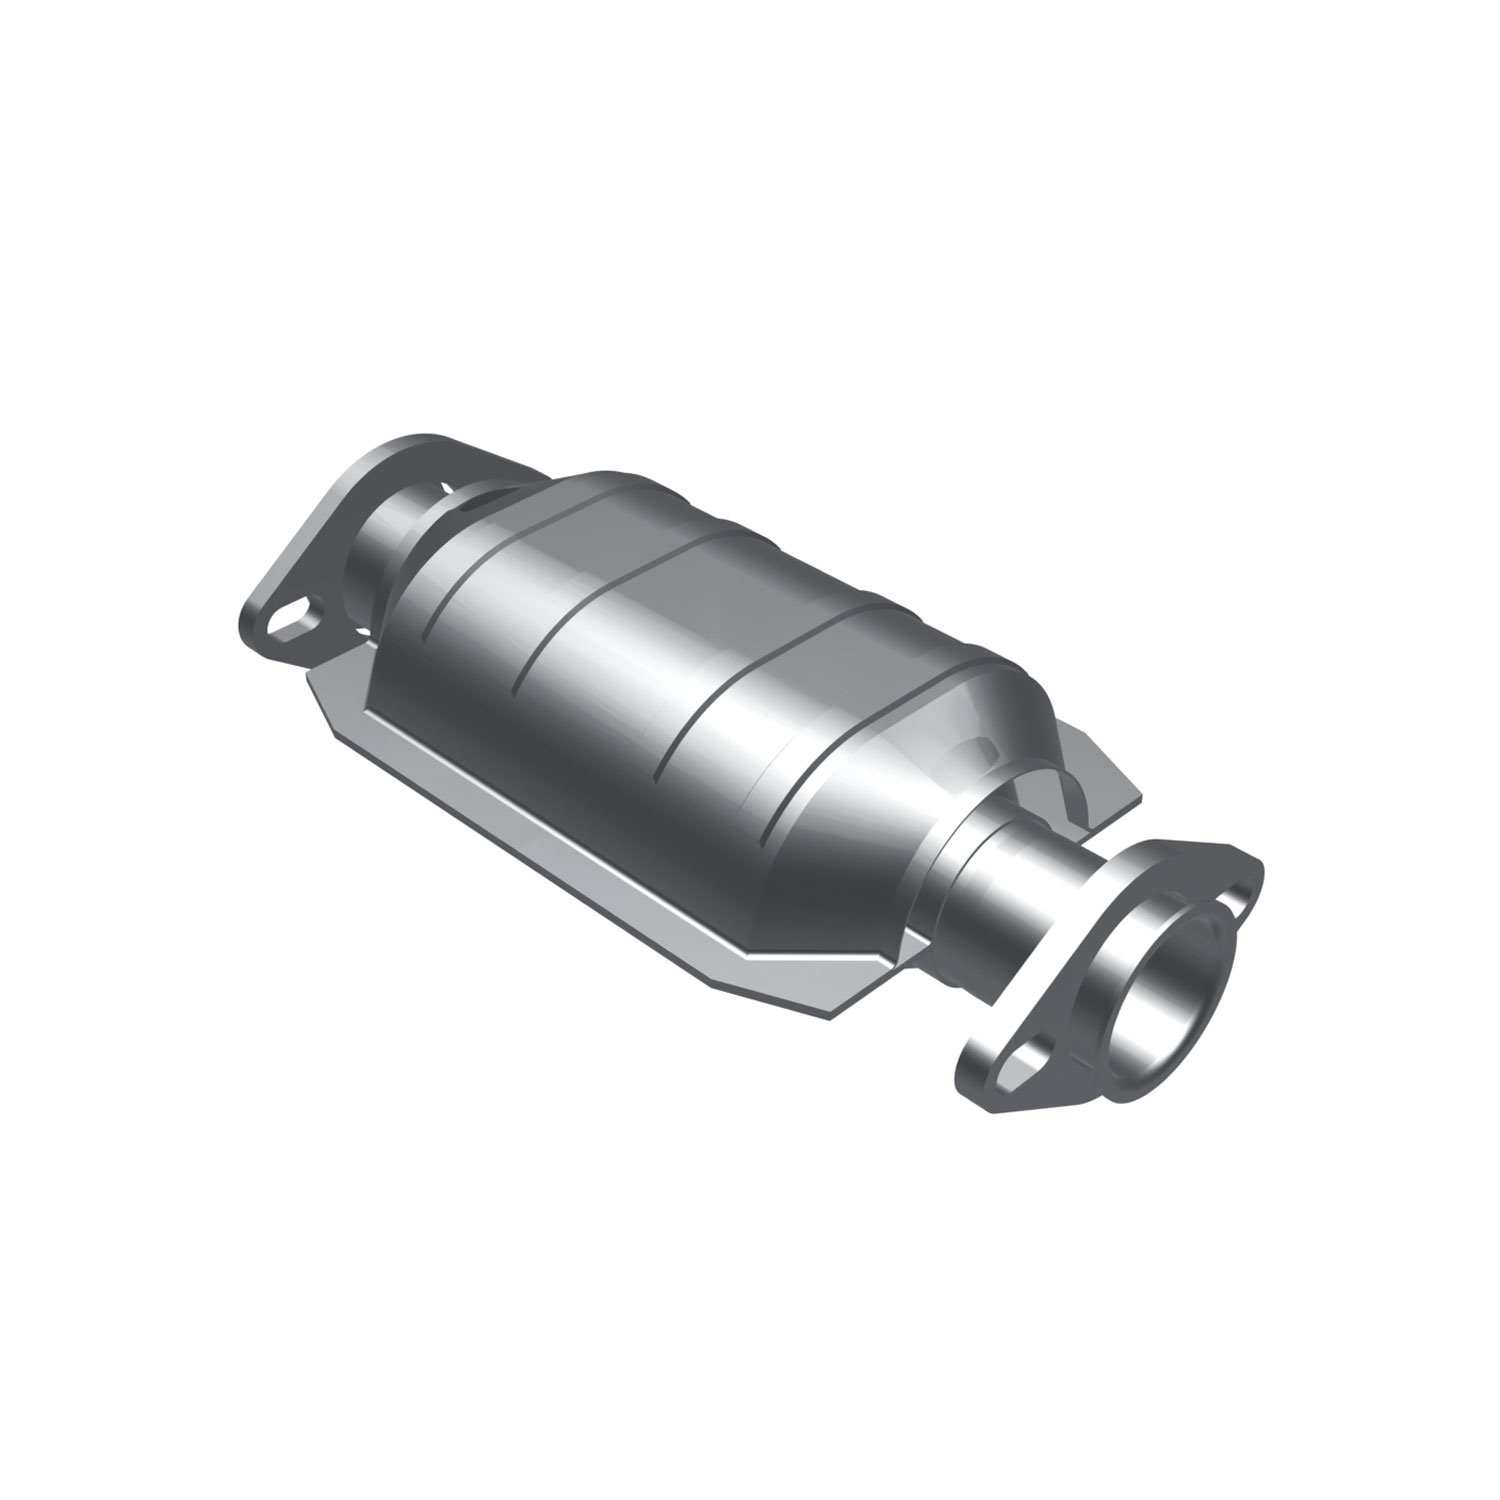 HM Grade Federal / EPA Compliant Direct-Fit Catalytic Converter 23347